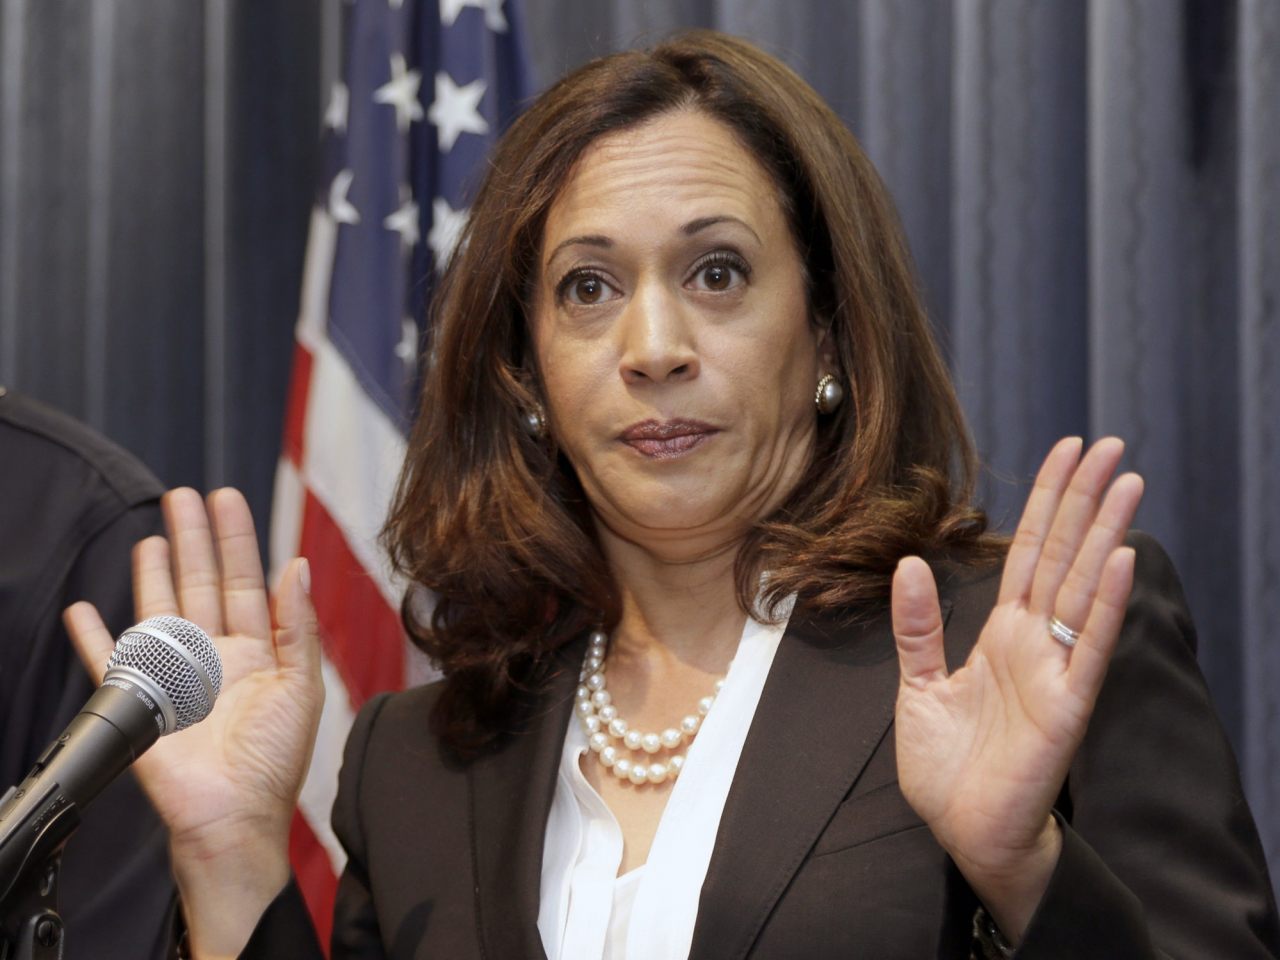 Kamala Harris reveals herself as an anti-Christian BIGOT who hates God and anyone who recognizes the existence of God